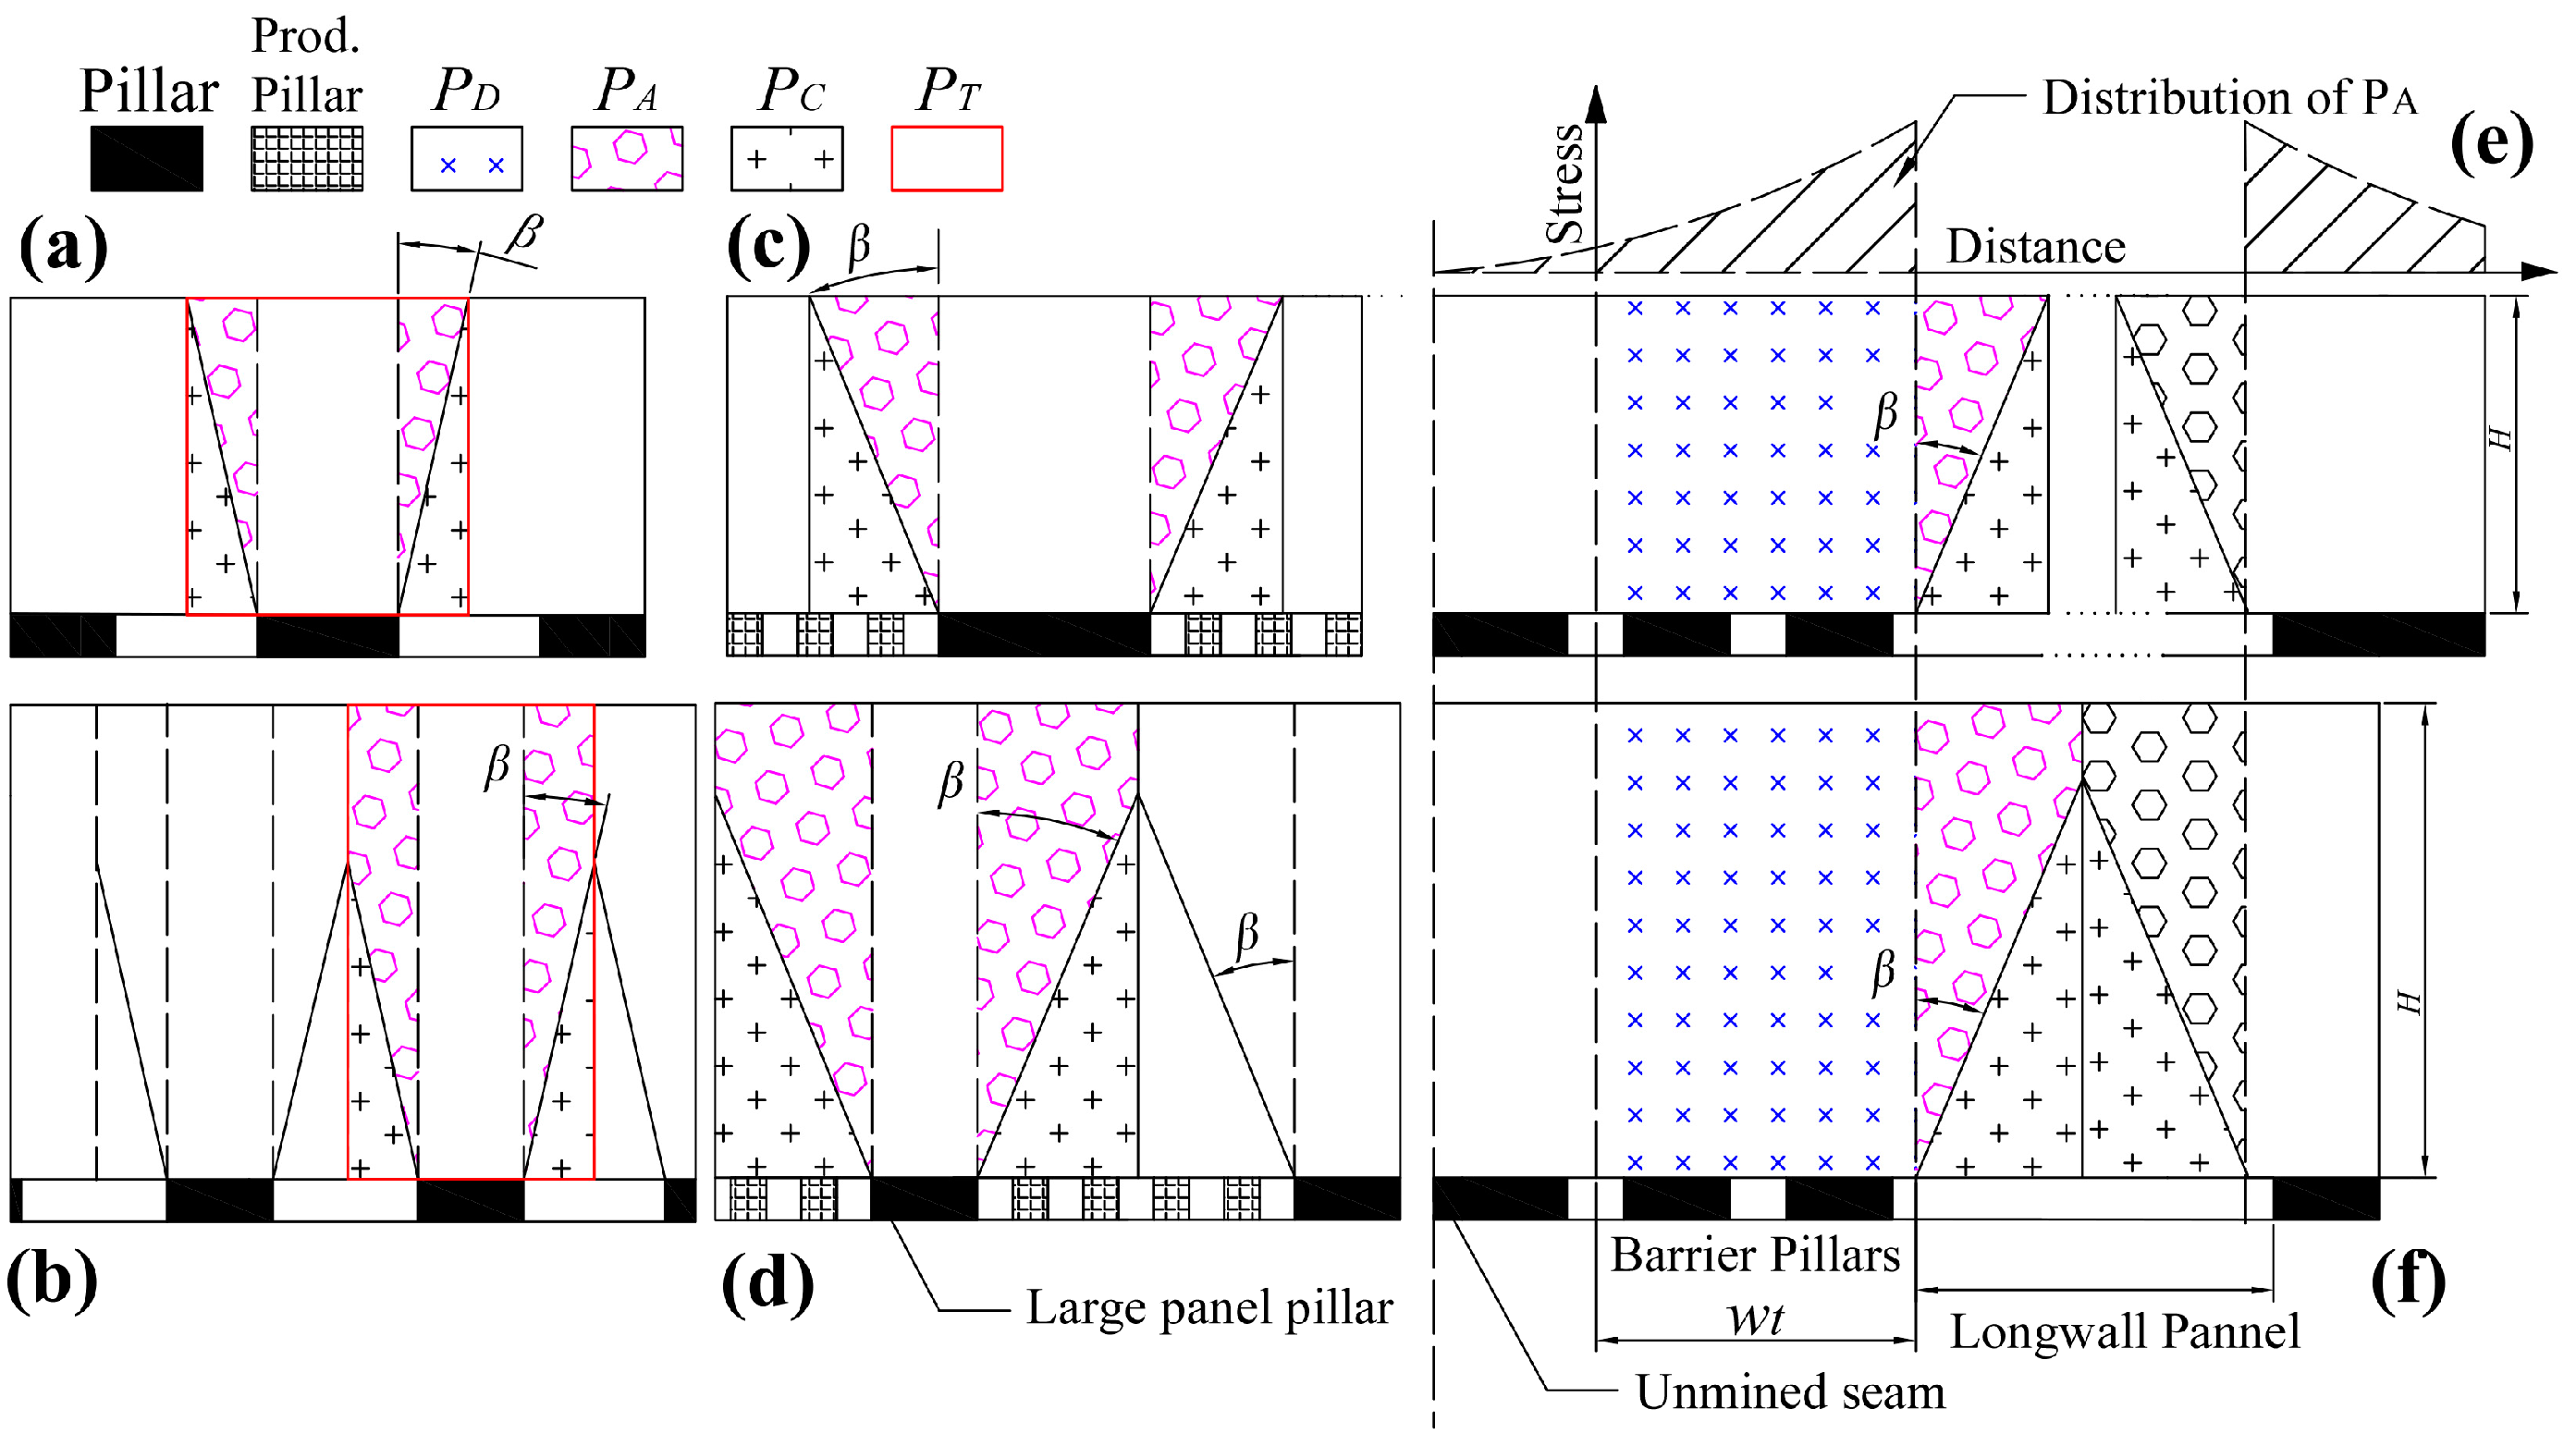 Sustainability Free Full Text Subsidence Mechanism And